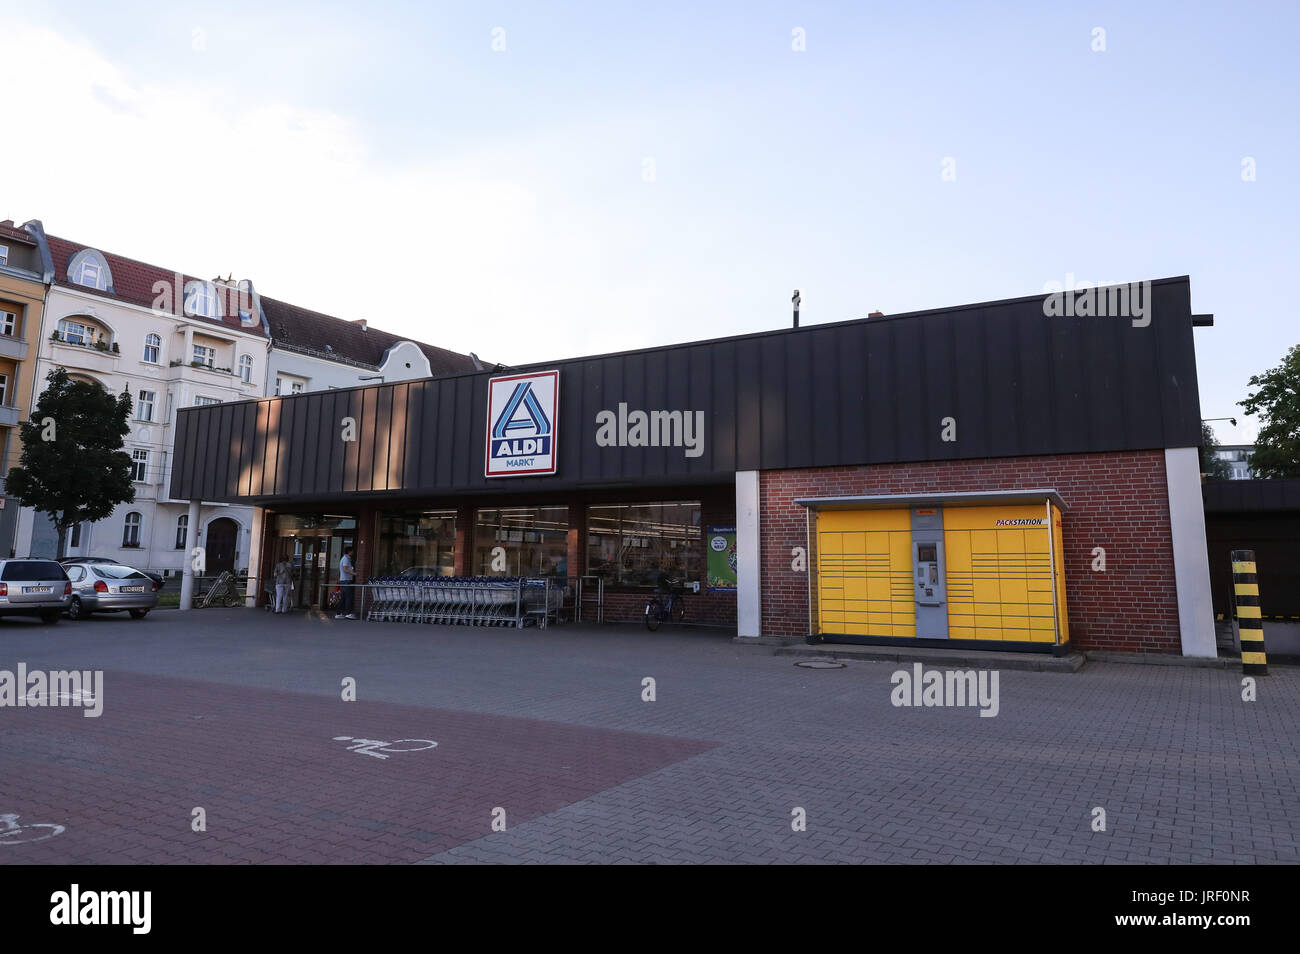 Berlin. 4th Aug, 2017. Photo taken on Aug. 4, 2017 shows an Aldi supermarket in Berlin, capital of Germany. German supermarket chain Aldi has stopped selling eggs in all of its stores due to a possible pesticide contamination, the company announced on Friday. Credit: Shan Yuqi/Xinhua/Alamy Live News Stock Photo